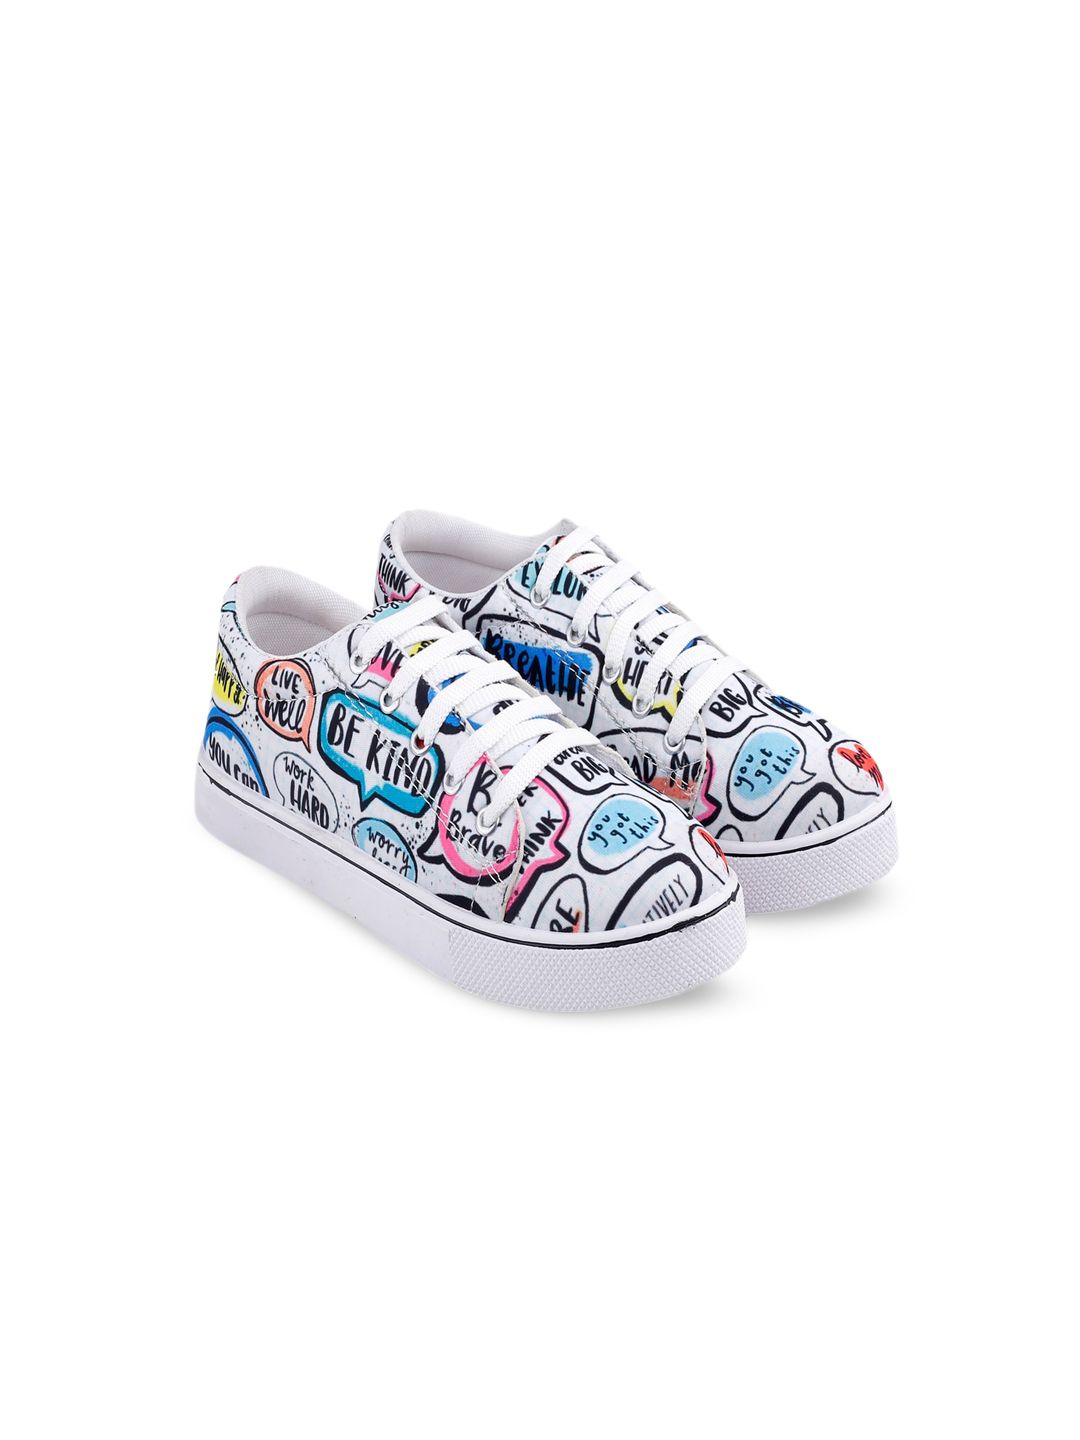 HASTEN Women White Printed Sneakers Price in India